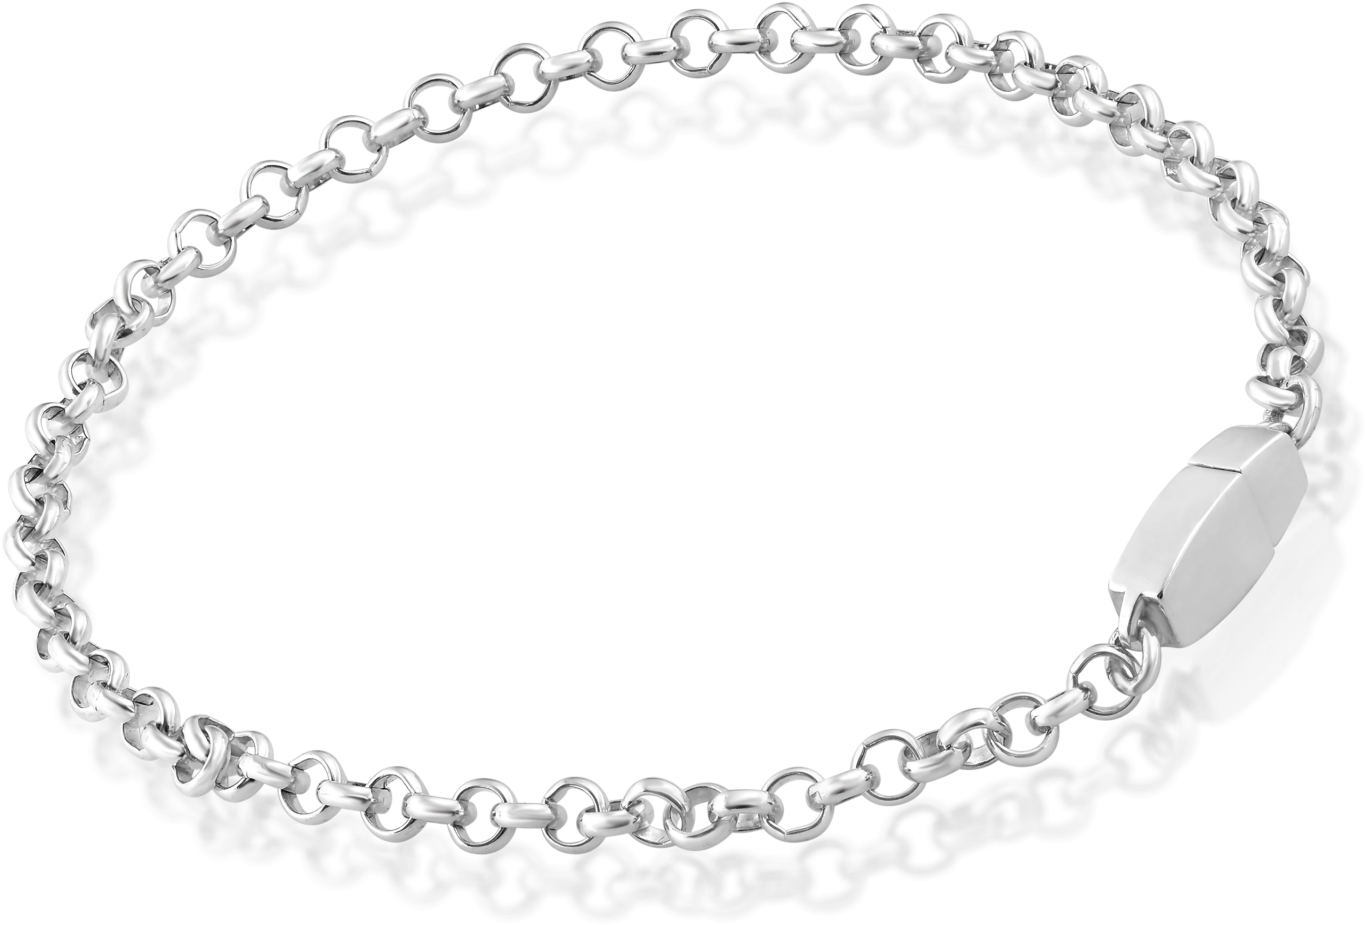 Silver Chain Png - Sterling Silver Chain (1600x1600), Png Download